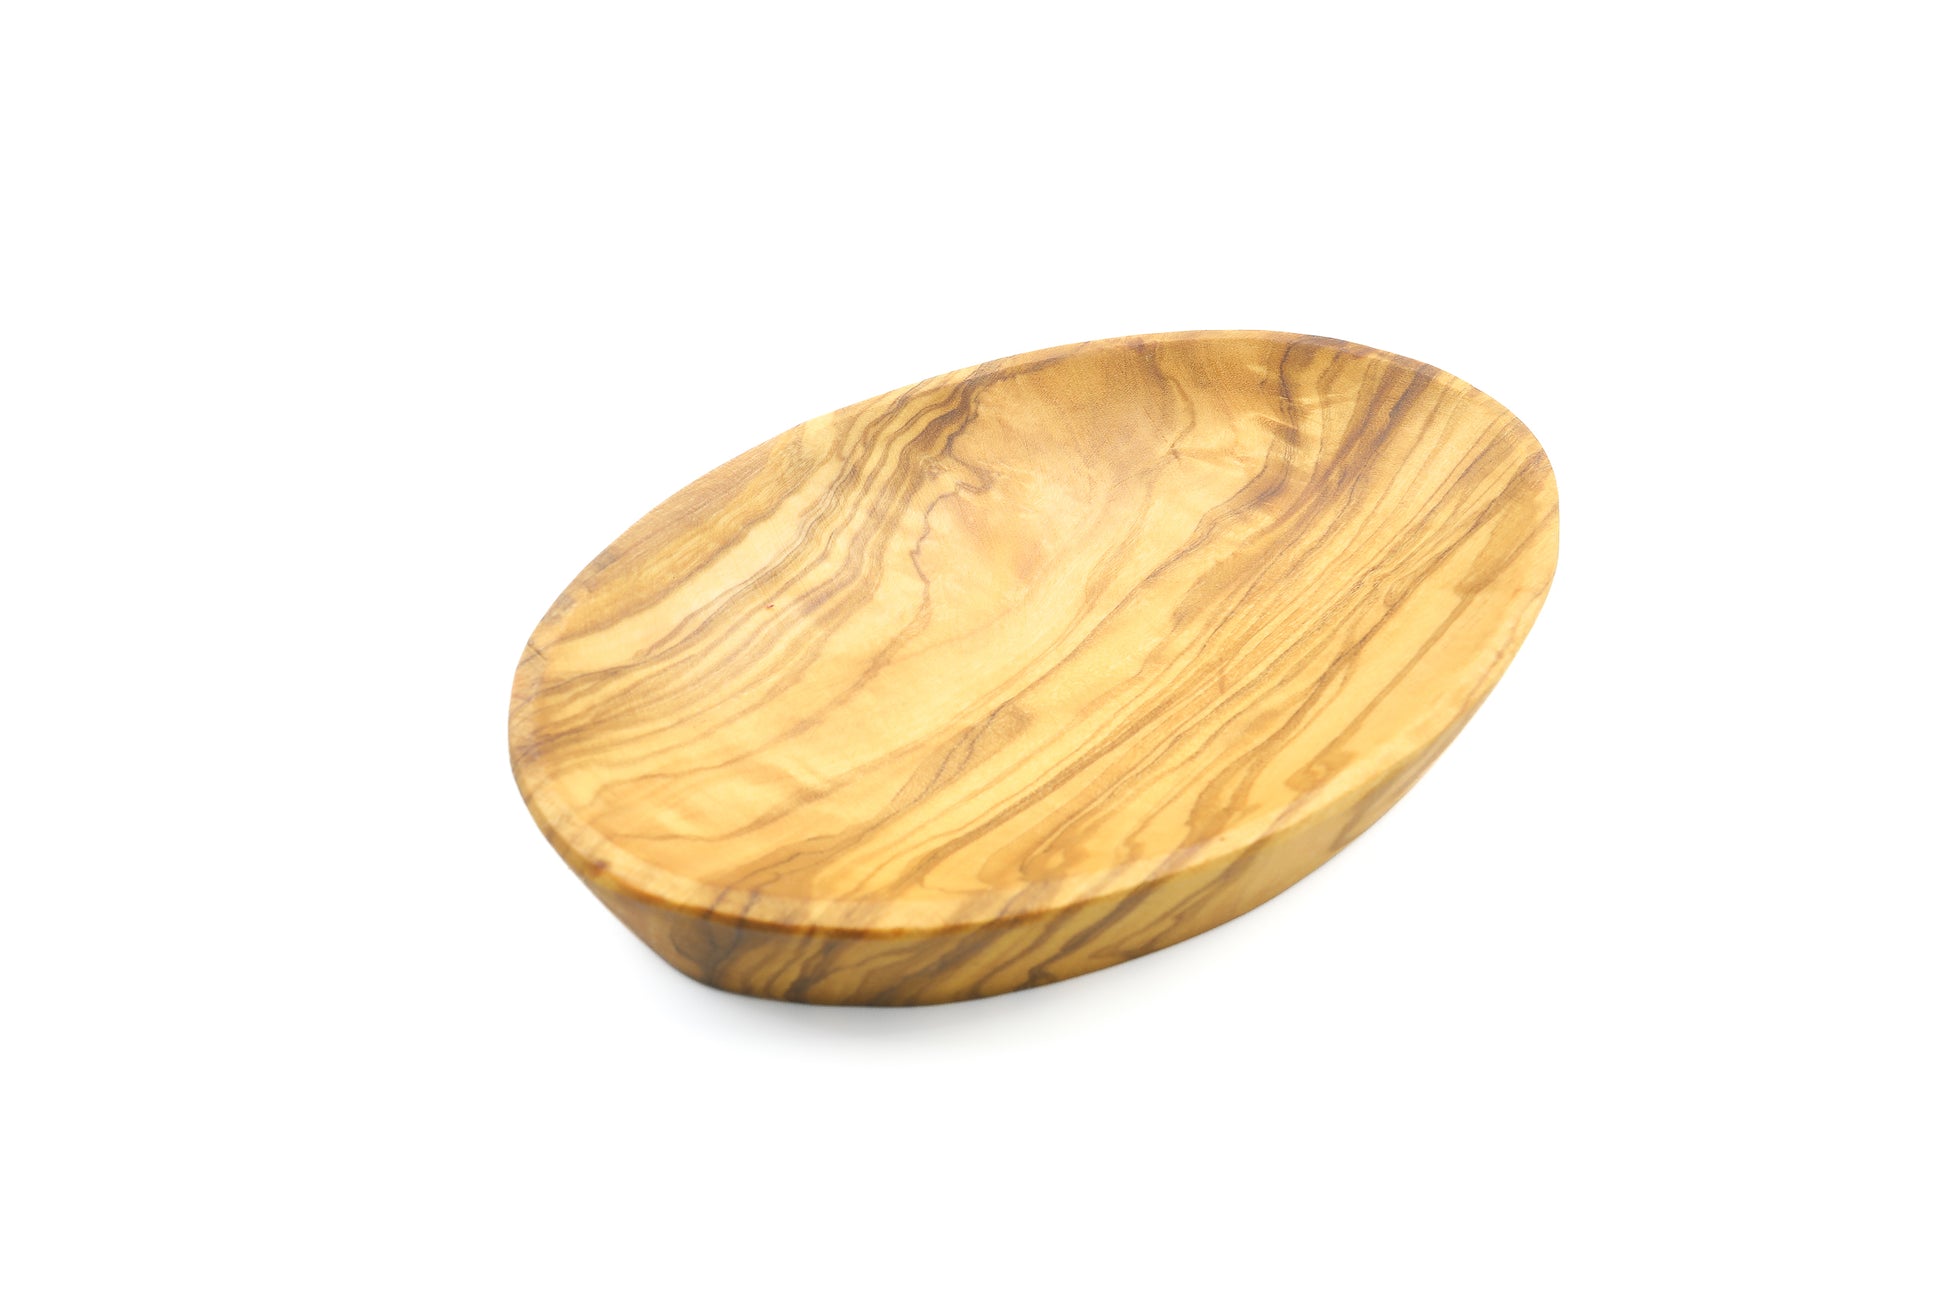 Unique oval bowl and olive picker set, expertly crafted from olive wood